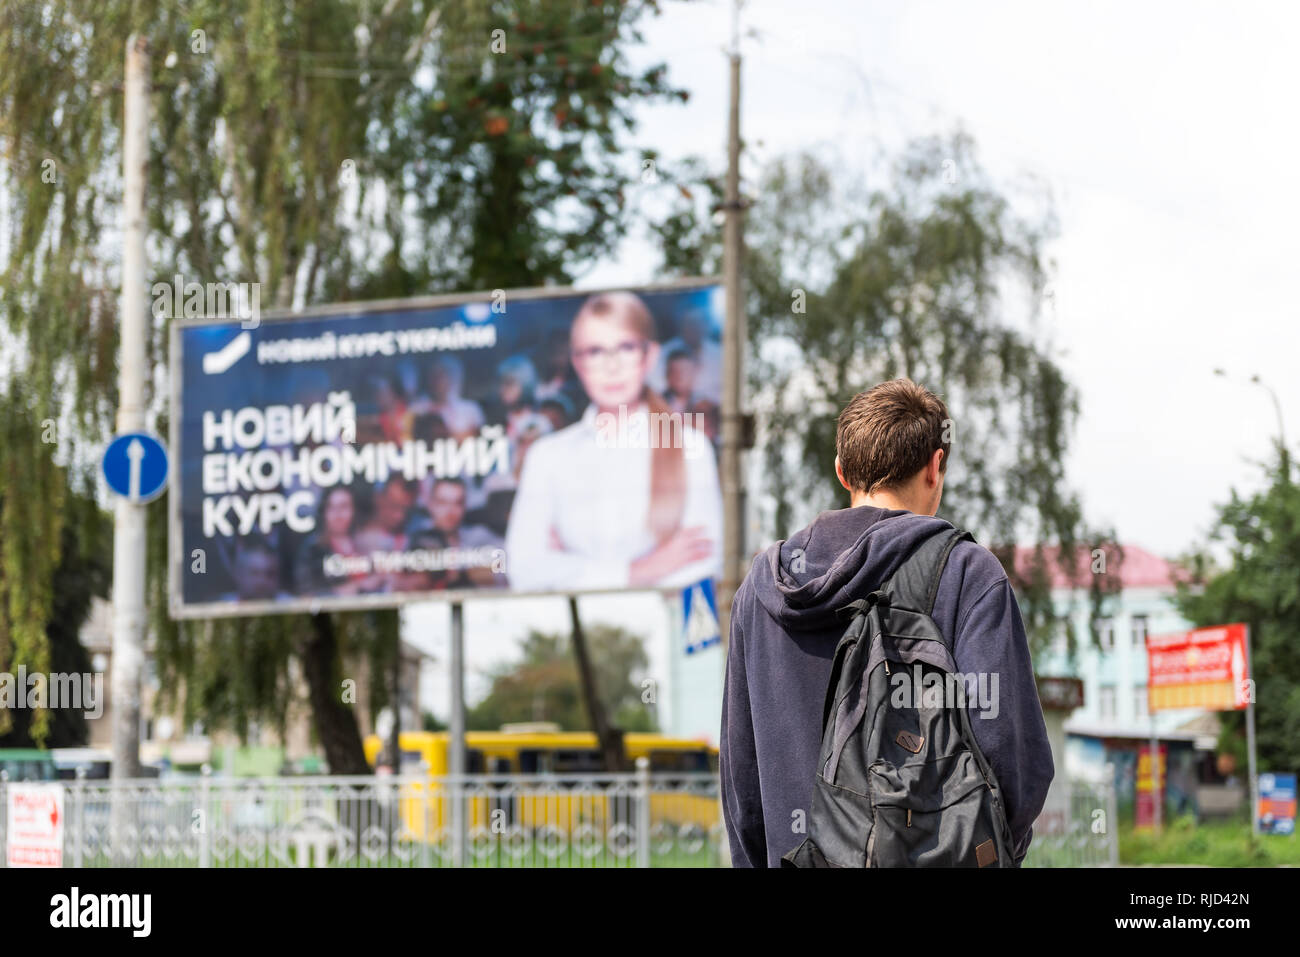 Rivne, Ukraine - July 28, 2018: Young Ukrainian man walking in front of political advertisement ad banner sign for Yulia Tymoshenko for president by s Stock Photo